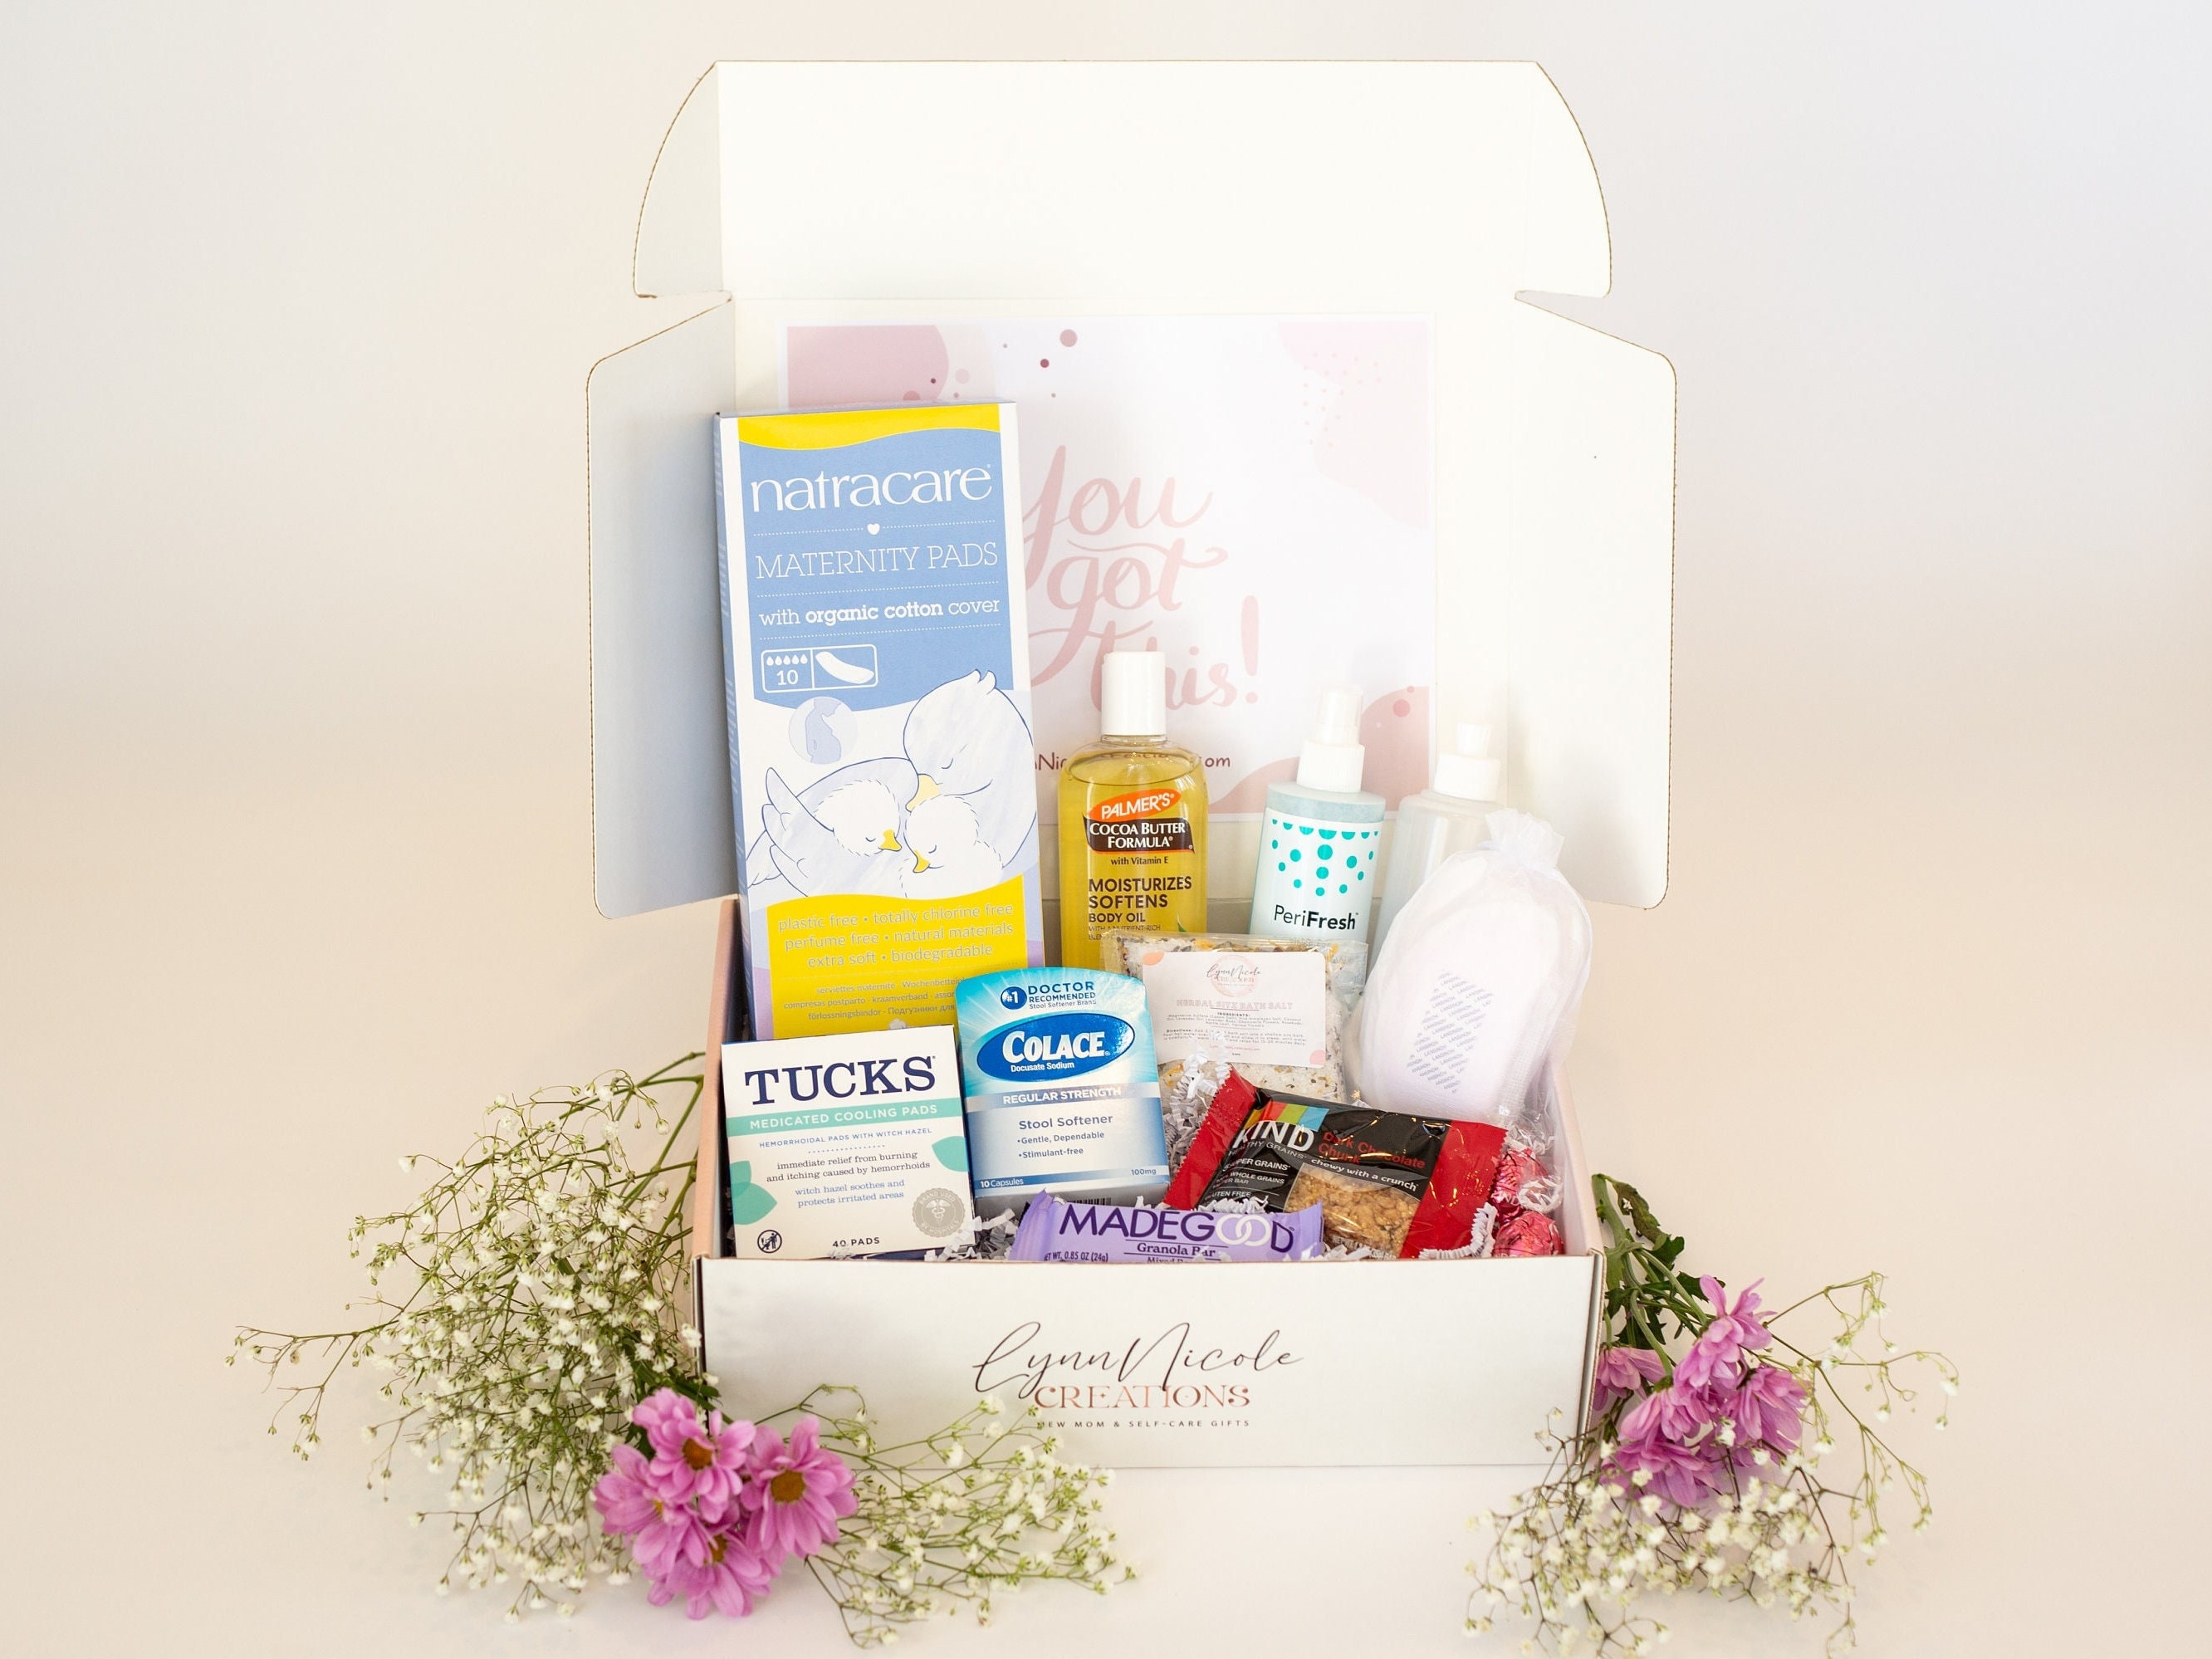 NEW MOM CARE Package, New Mom Gift Box for Friend, Pregnancy Gift Basket,  Self Care for New Mom, Pregnancy Gift Box for Best Friend